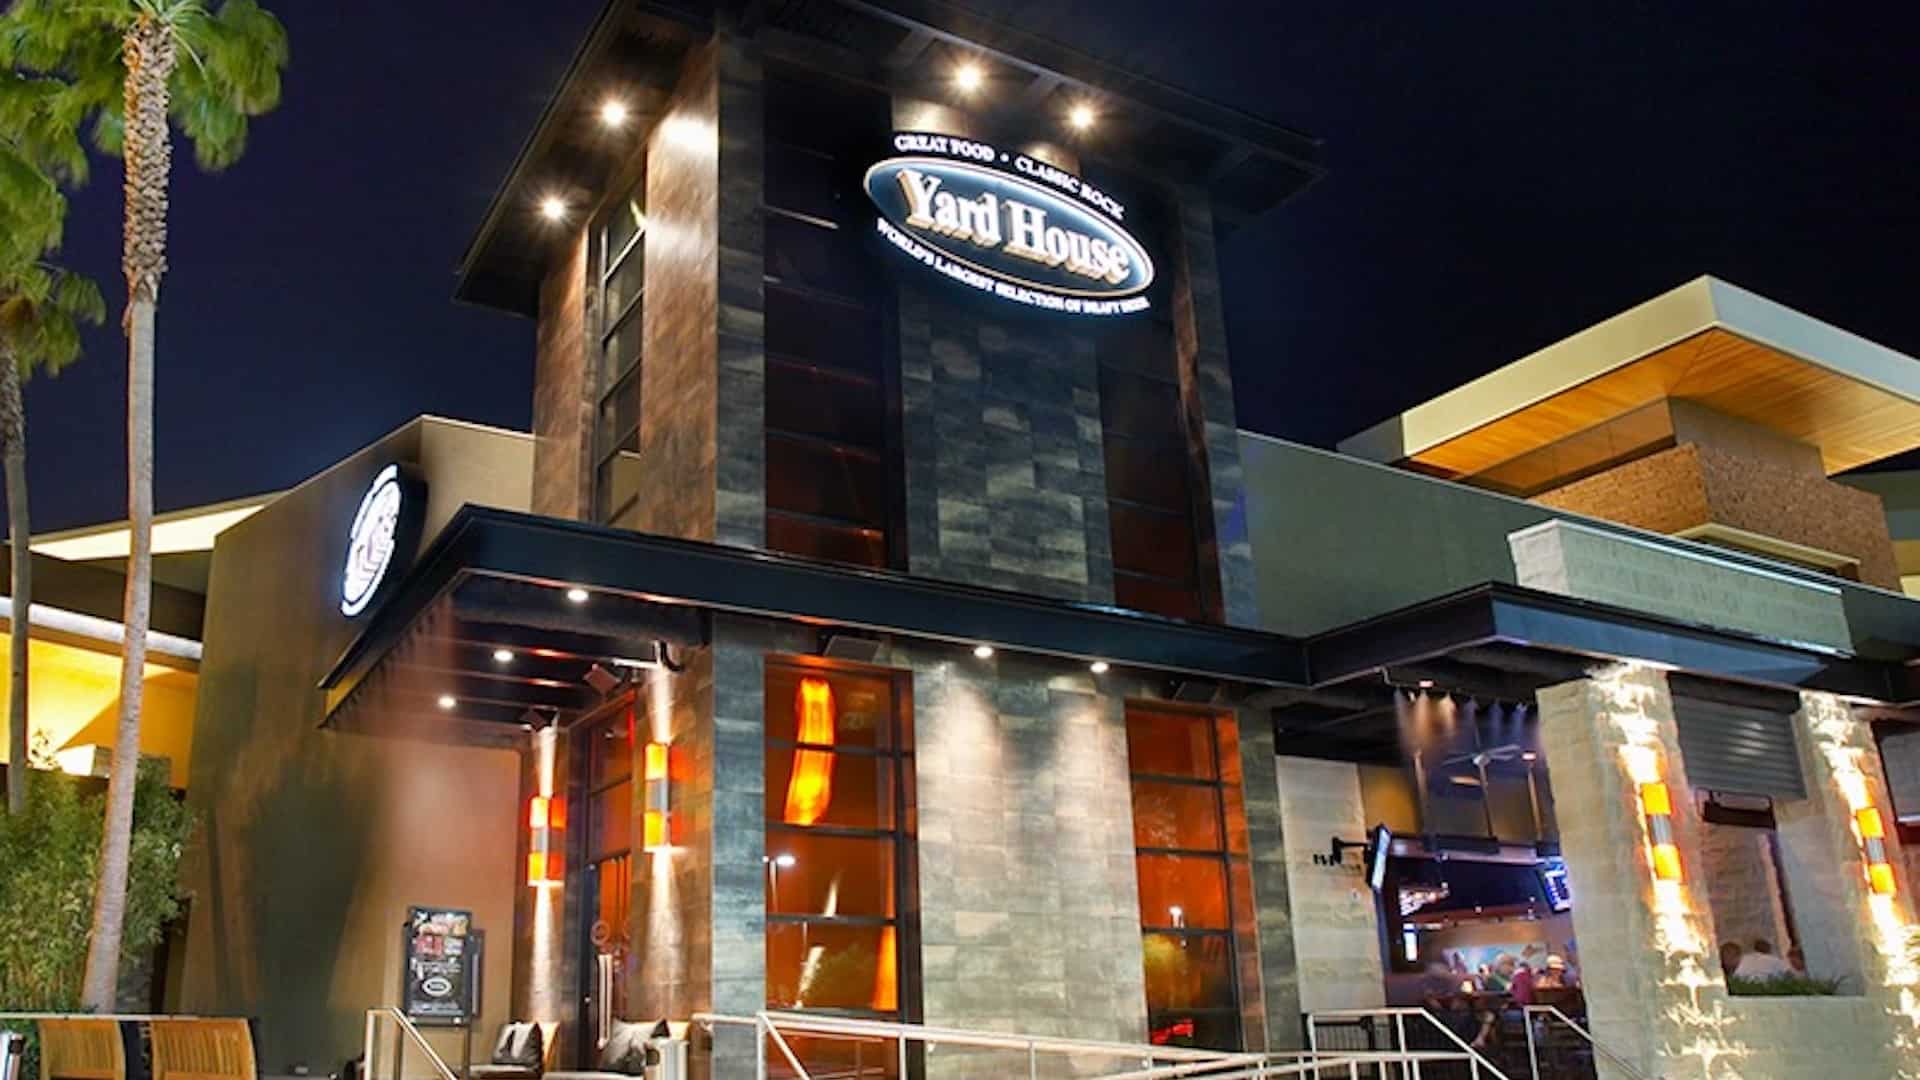 Exterior of a restaurant with stone walls, and lit up sign that reads "Yard House"